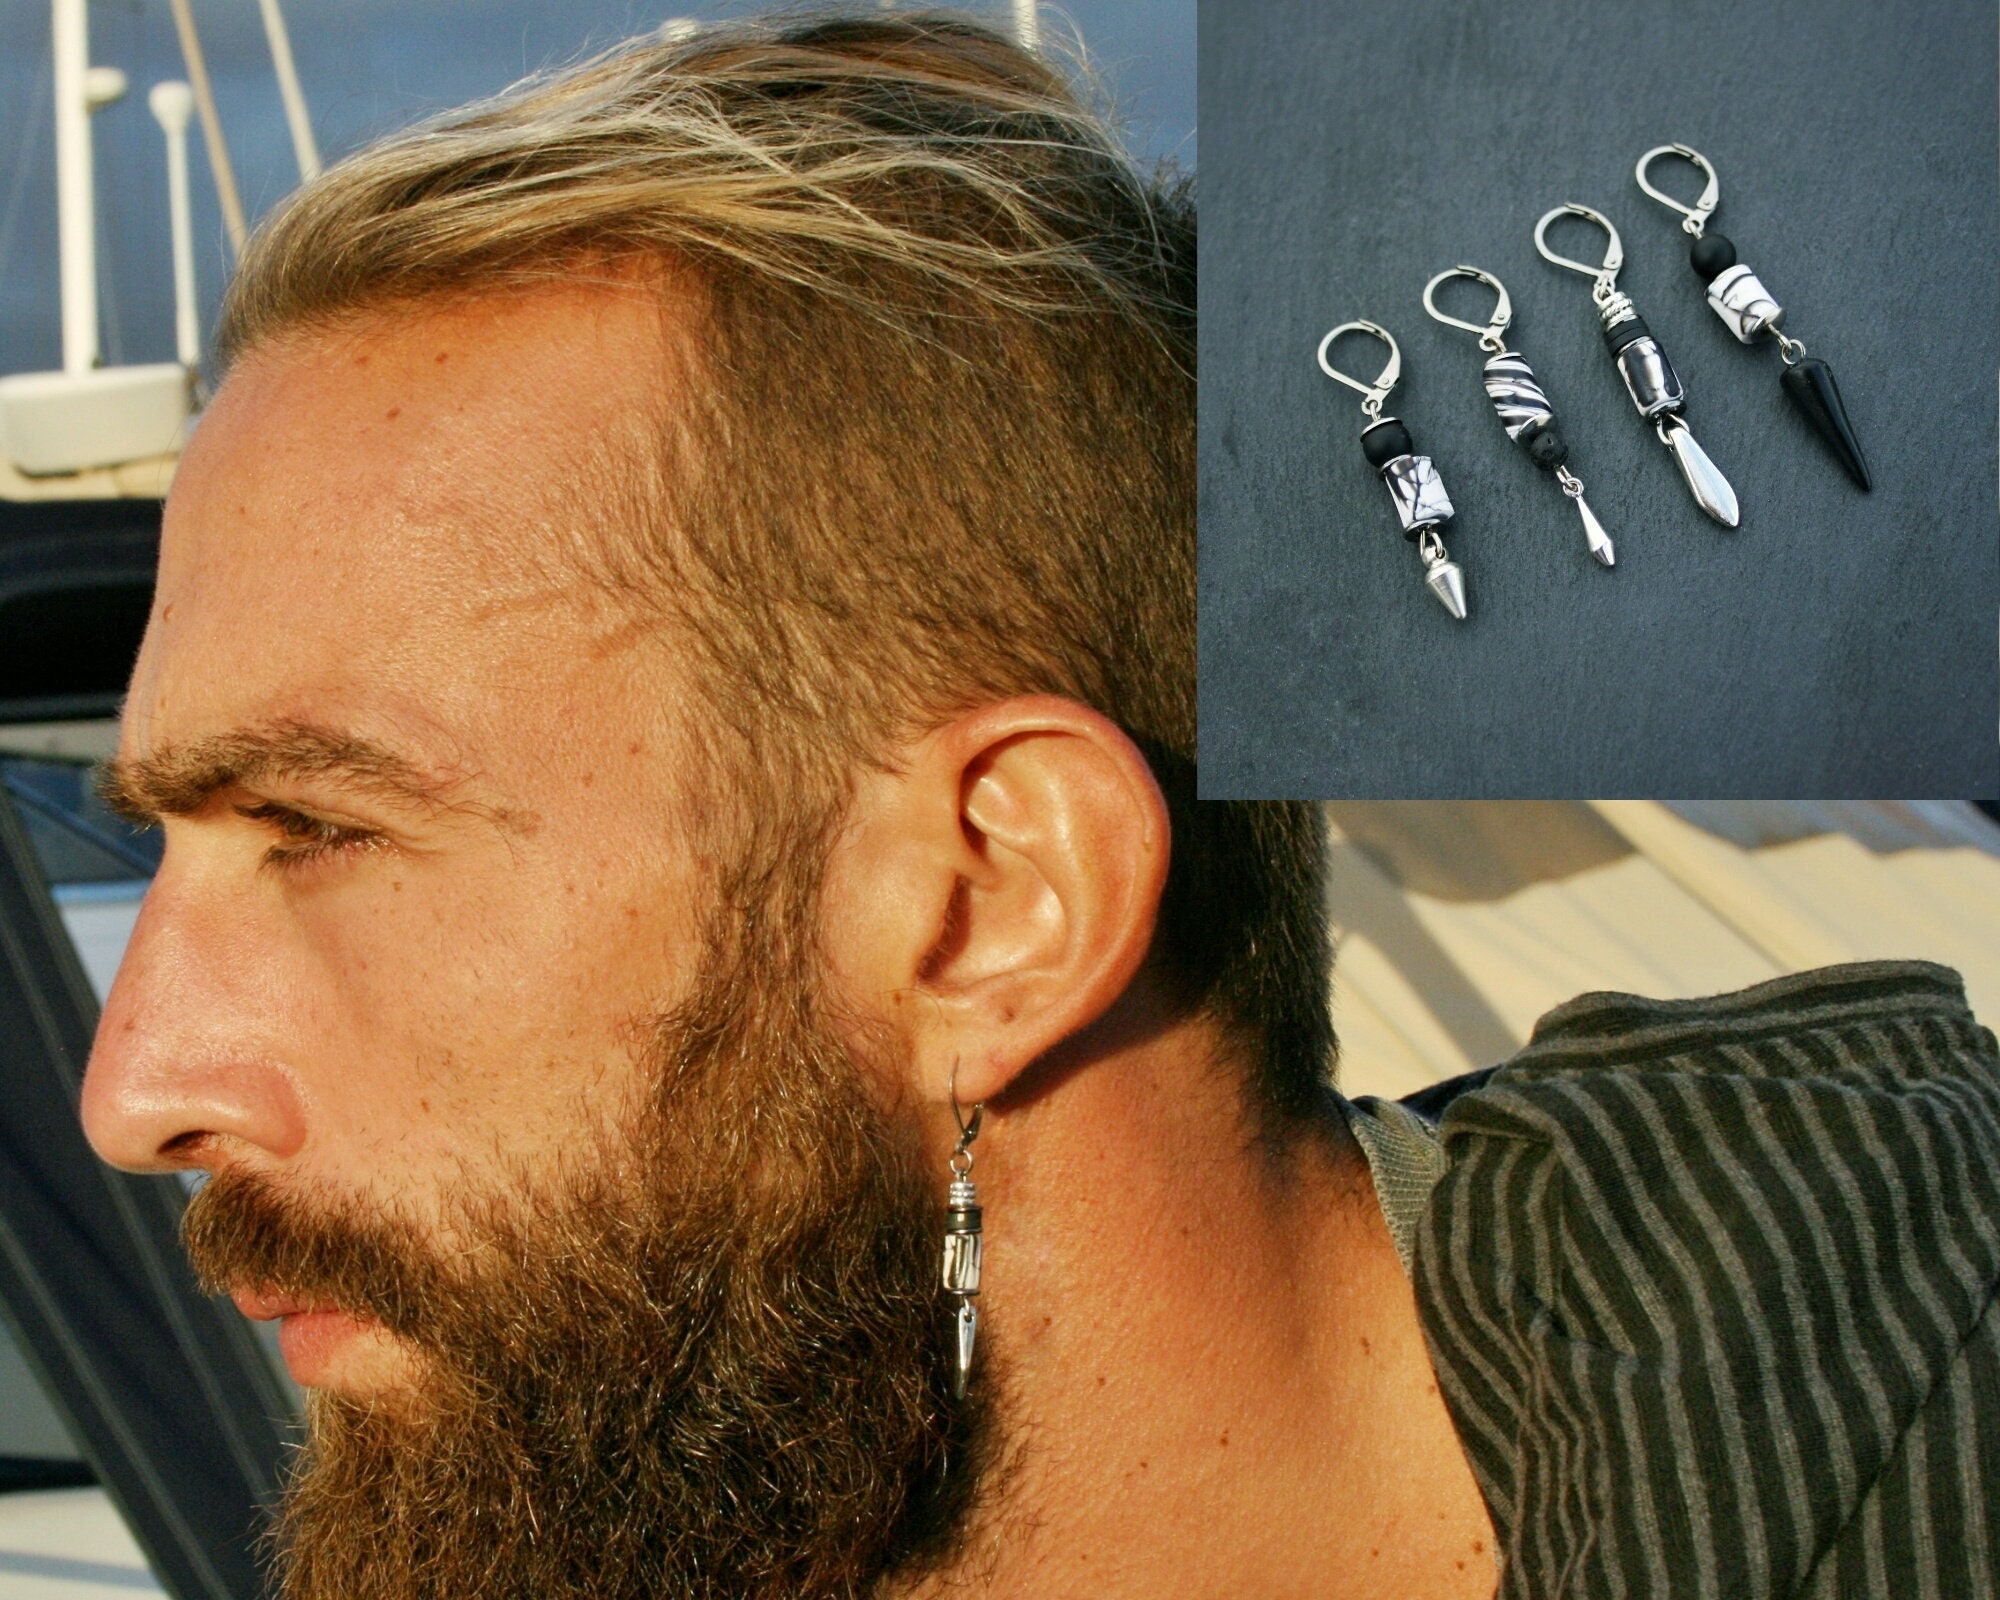 Buy Punk Man Earring Online In India  Etsy India